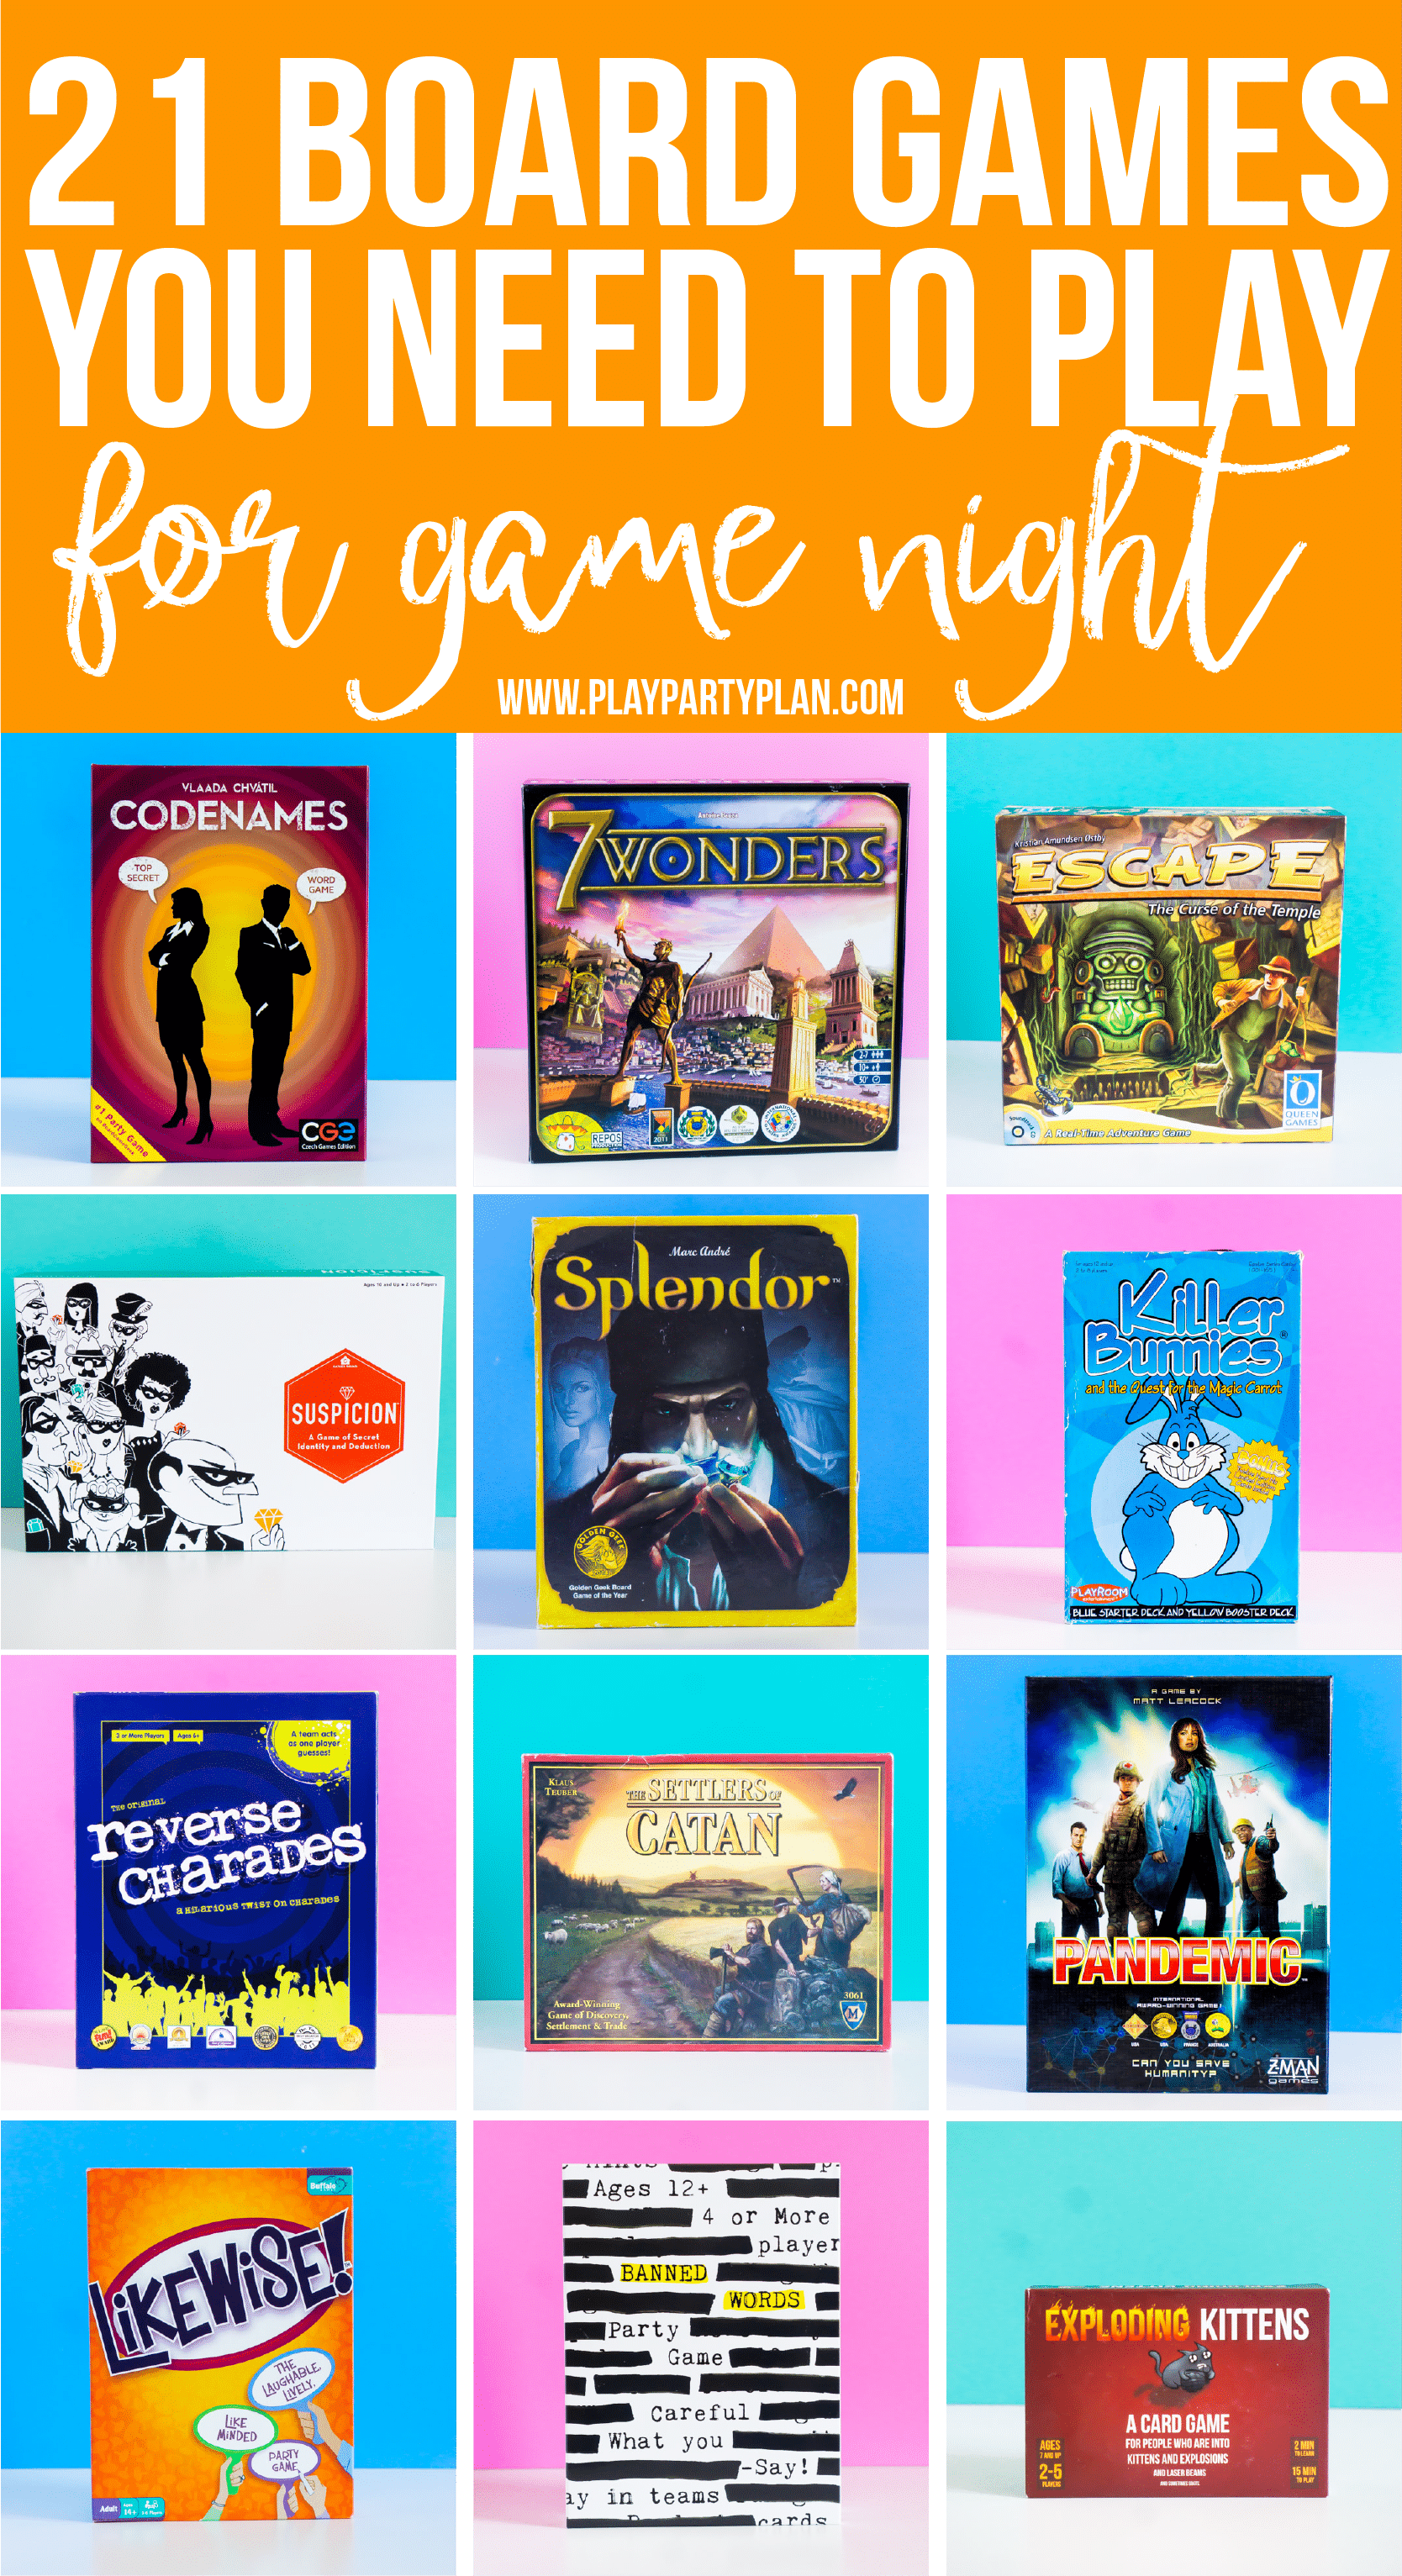 The best board games for adults or for teens! Setup a game night or a party and play these amazing board games - everything from classic games to strategy games you’ve probably never heard of! And even a bunch of board games that work for couples or for two players! 